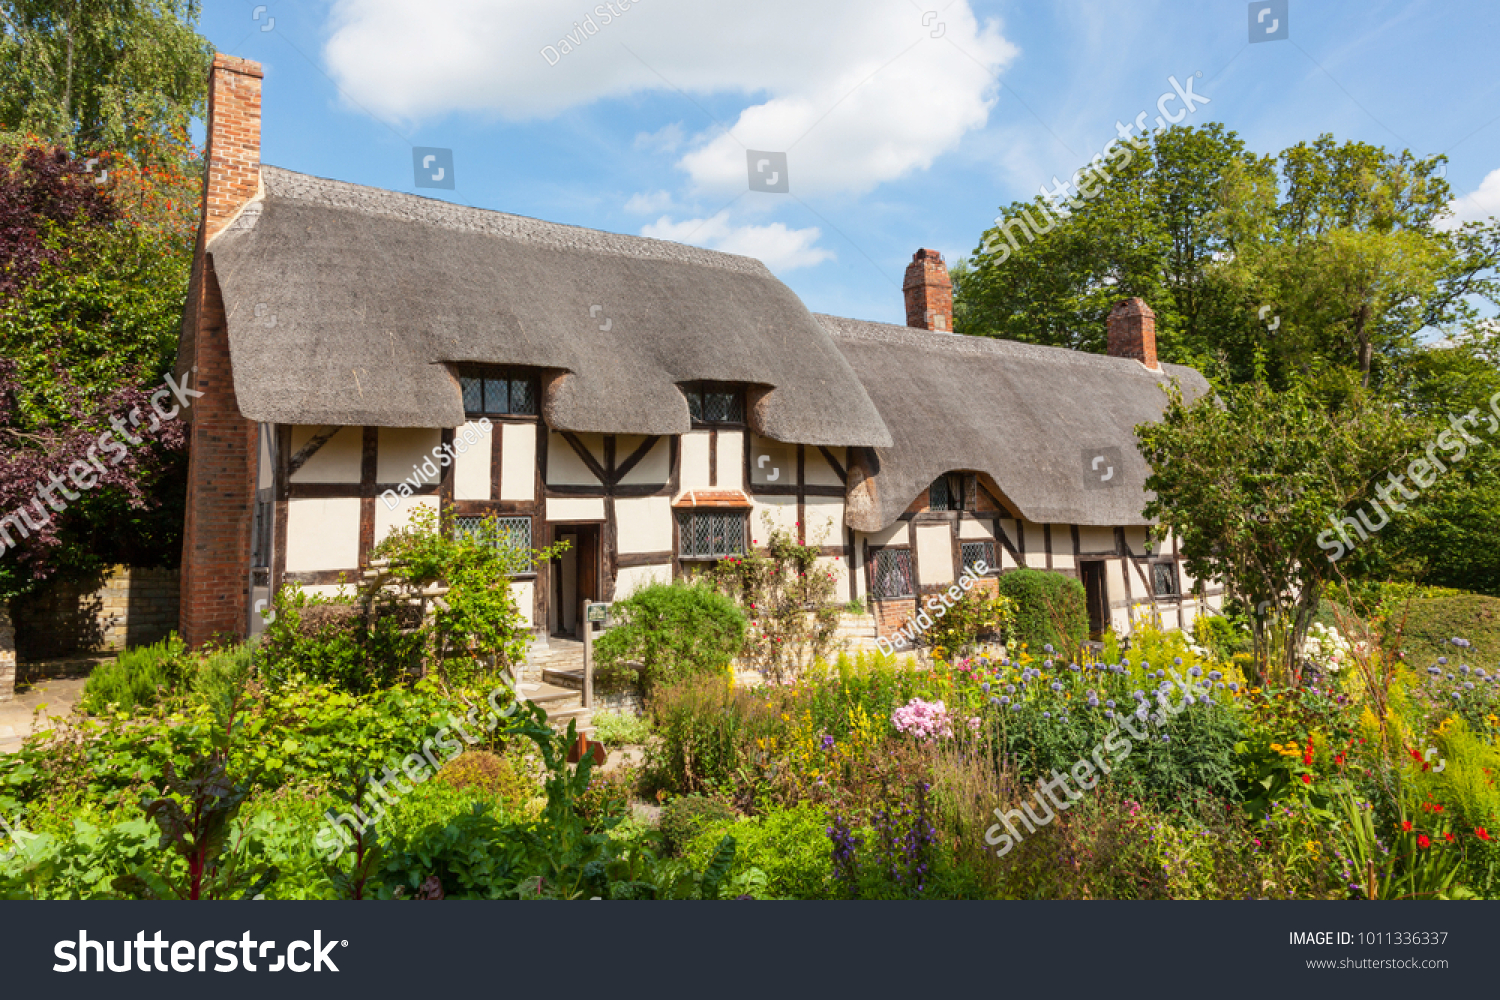 STRATFORD UPON AVON, ENGLAND - AUGUST 9, 2012: Anne Hathaway's (William Shakespeare's wife) famous thatched cottage and garden at Shottery, just outside Stratford upon Avon, England. #1011336337